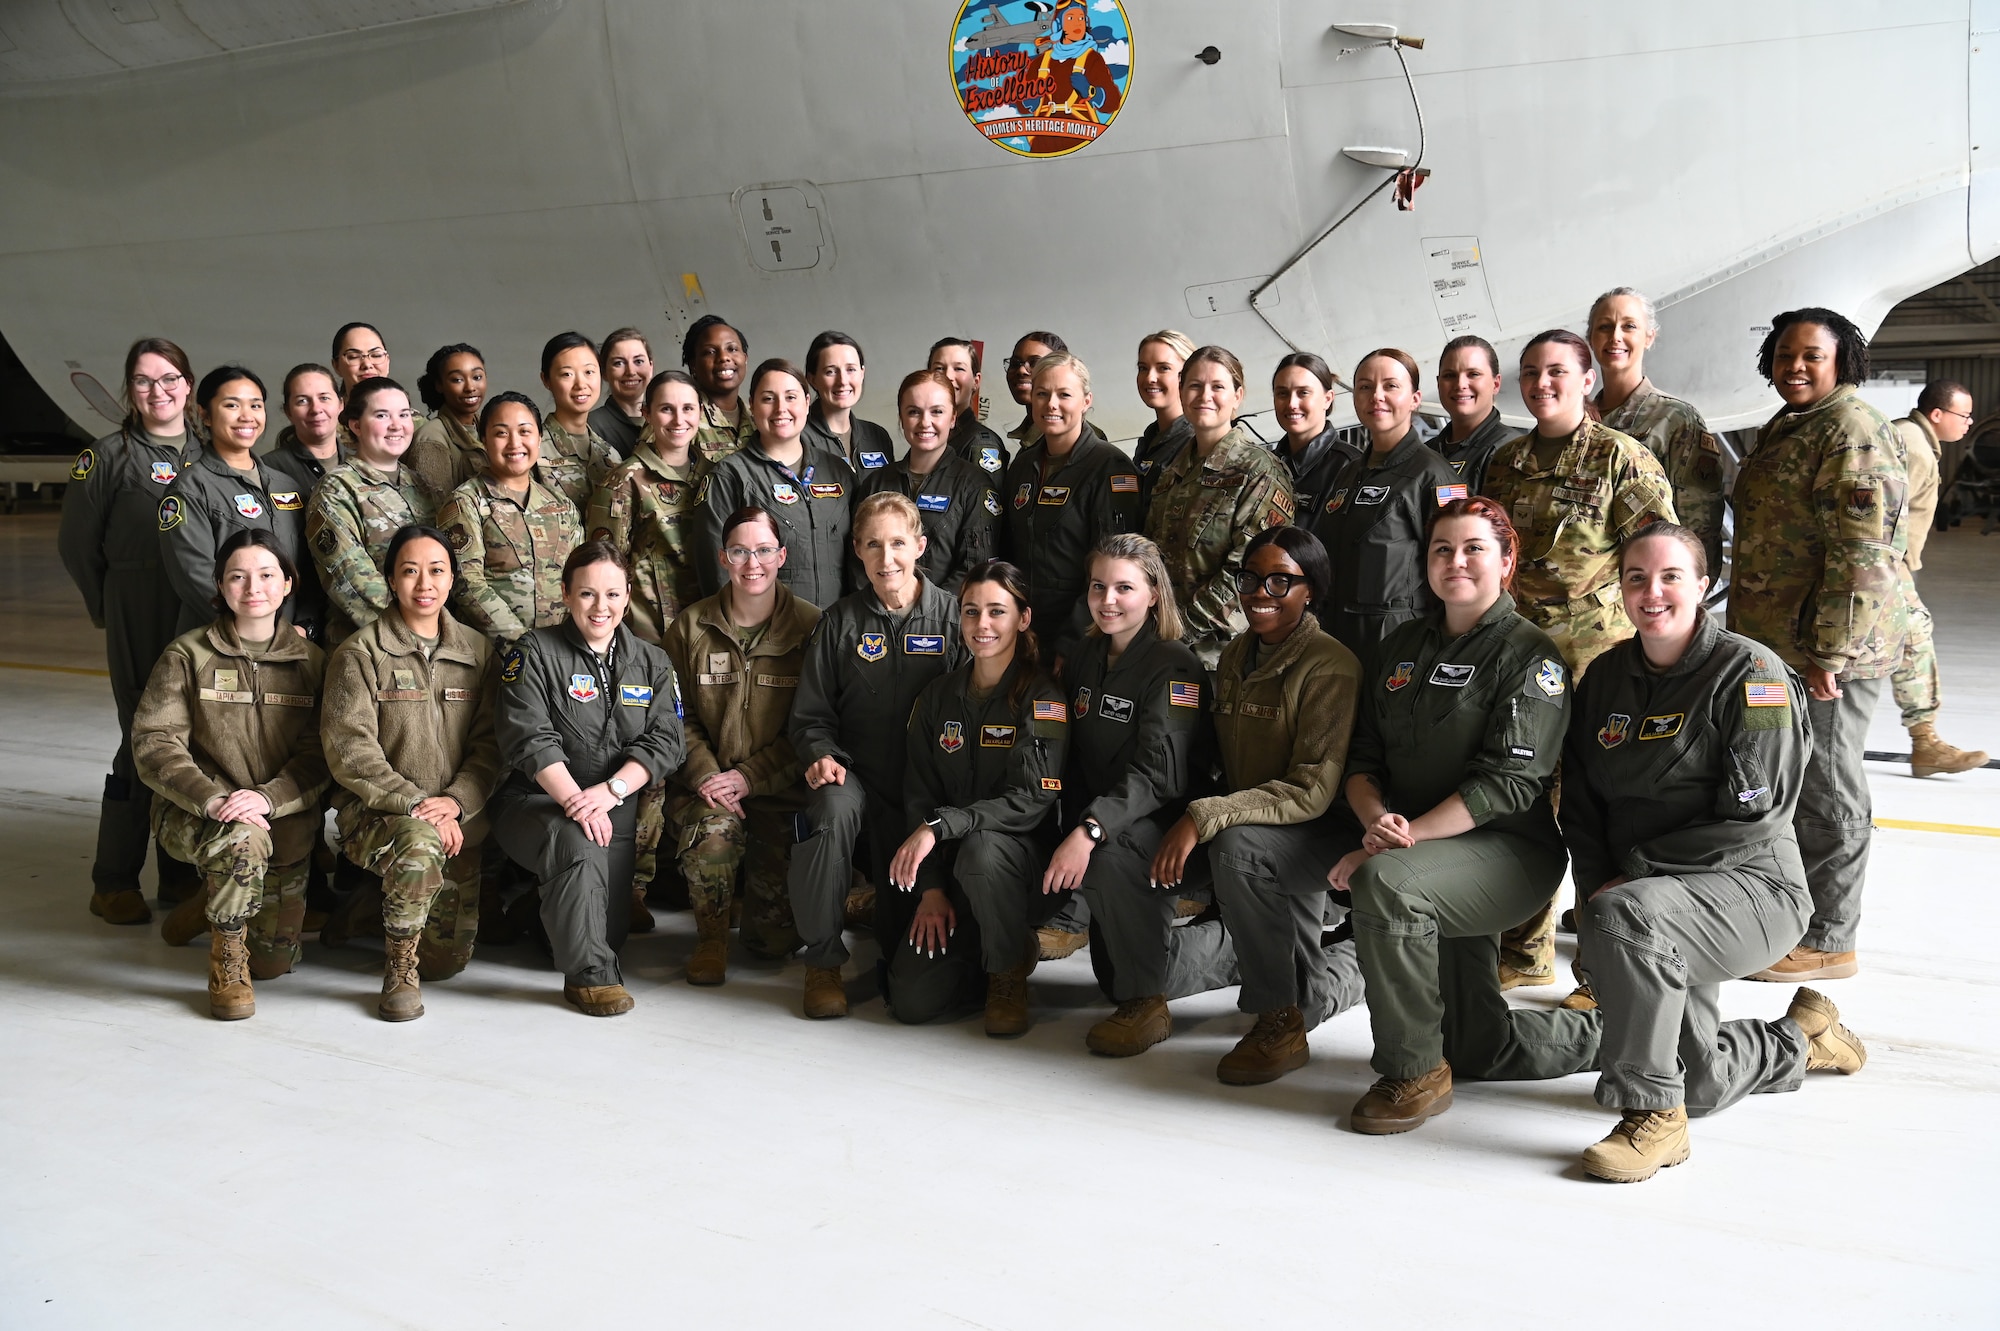 Female Airmen posing for group photo in front of E-3G aircraft